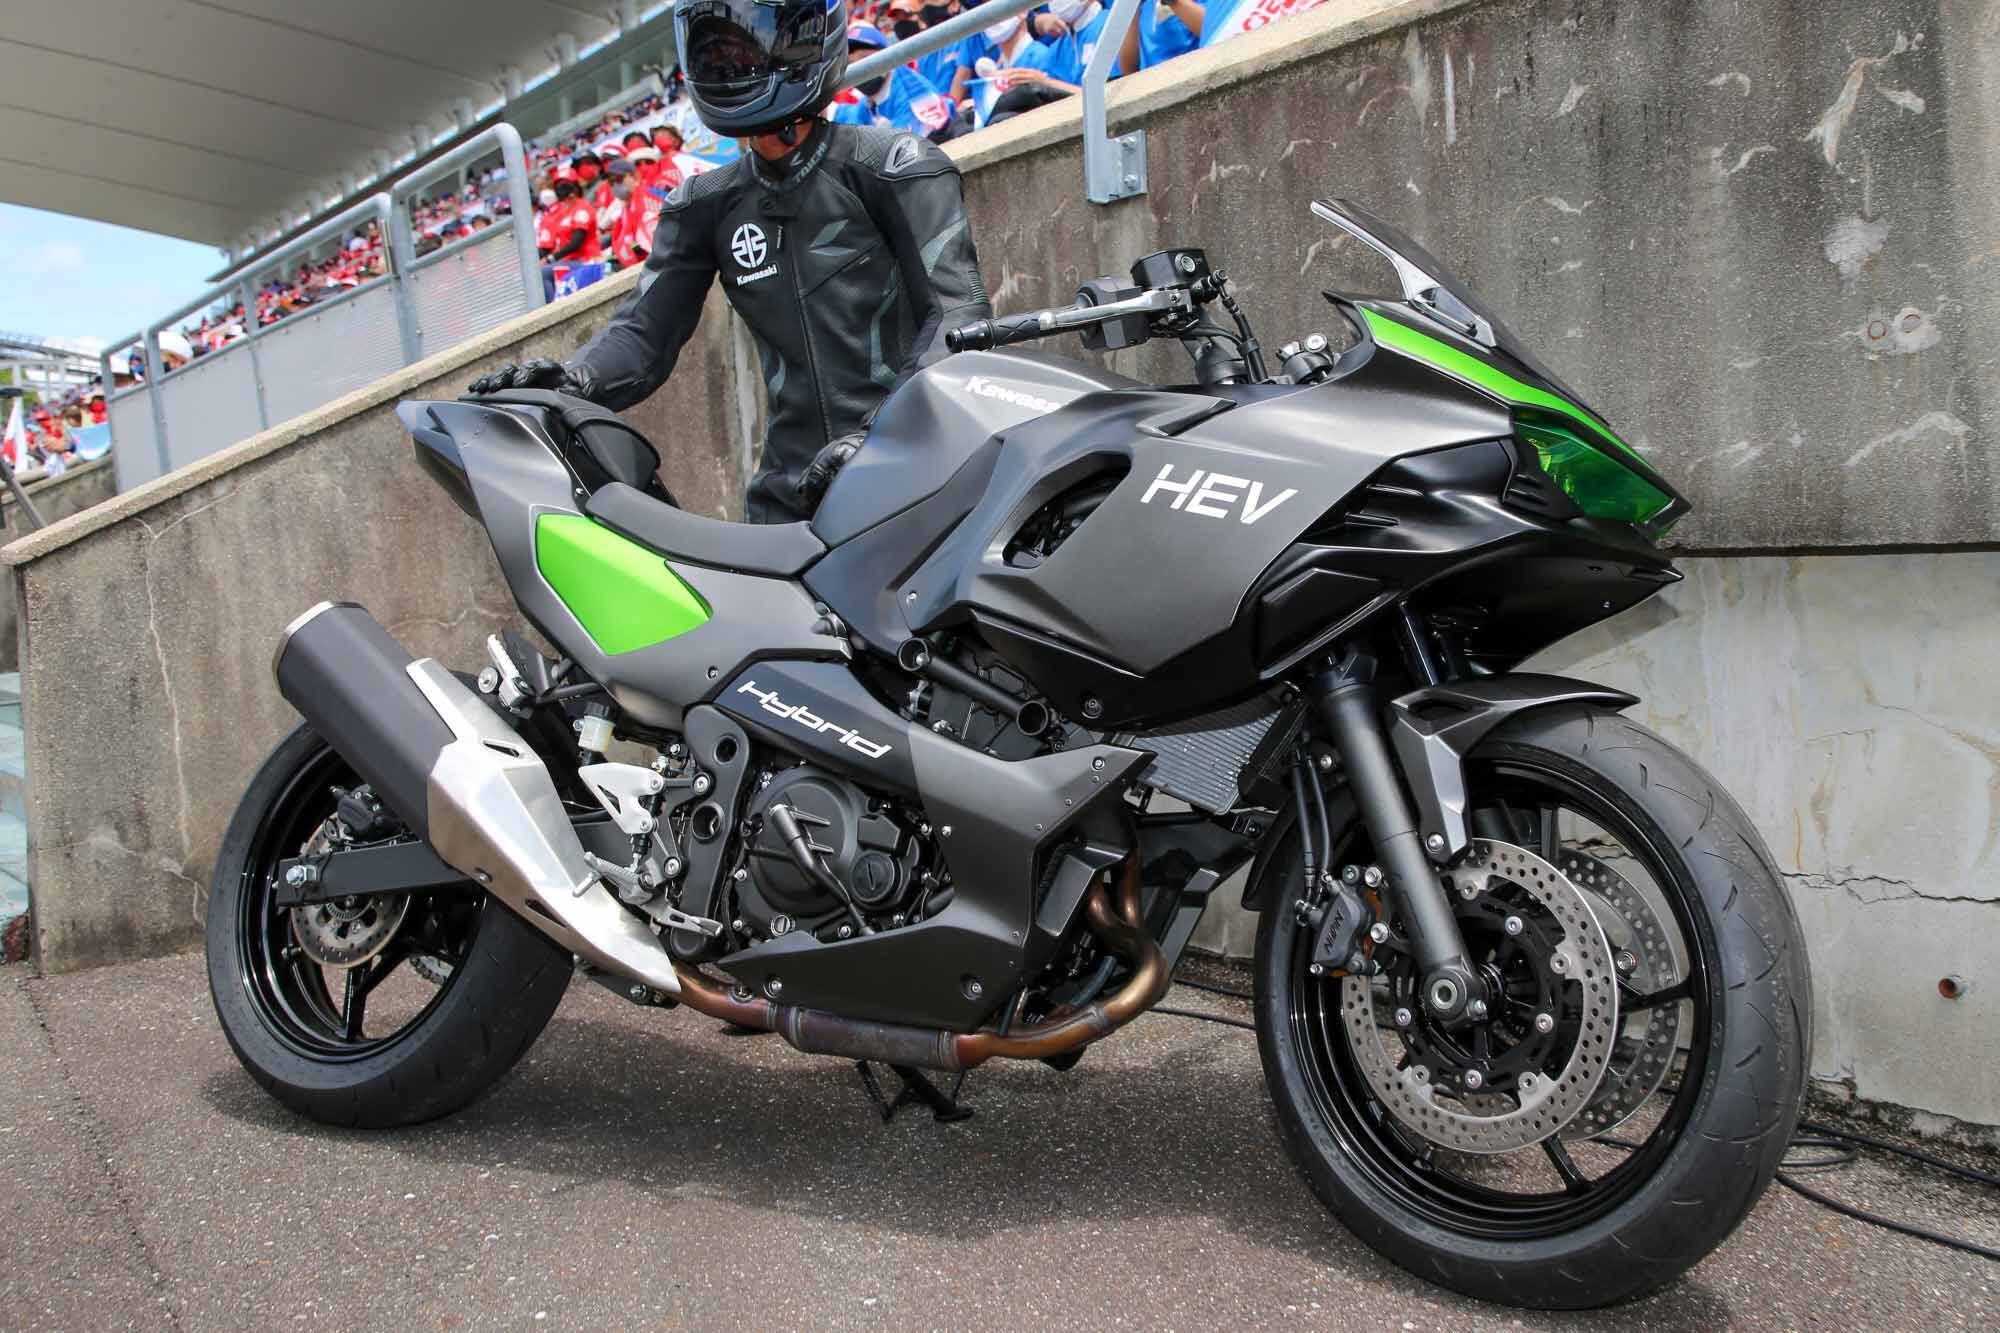 The right-side view of the hybrid reveals clues as to which IE-powerplant the bike uses, and also shows which parts it shares with existing models in Kawasaki’s lineup.